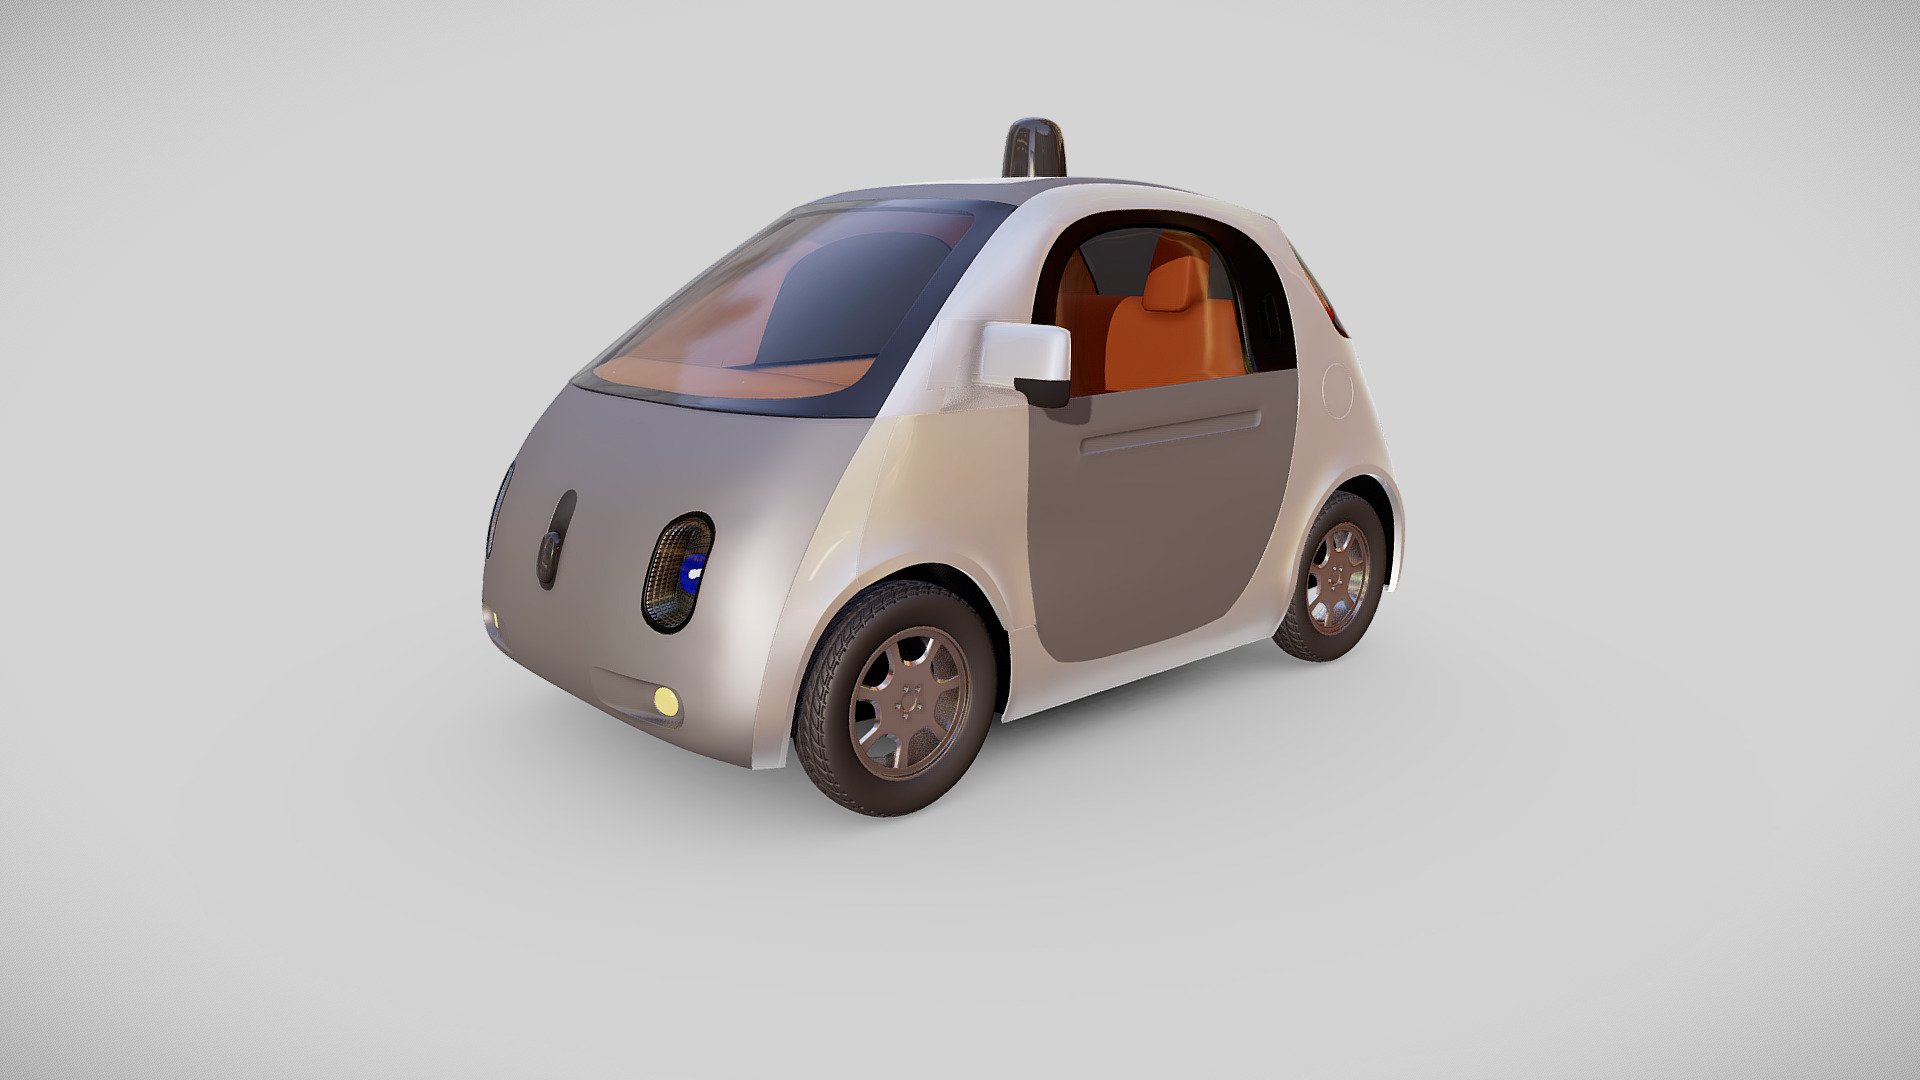 This high-quality 3D model represents a concept Google Car, an autonomous vehicle developed by Google for advanced mobility solutions. The model accurately depicts the sleek and futuristic design of the self-driving car, showcasing its aerodynamic curves and innovative features.

The Google Car is equipped with various sensors, including lidar and radar, neatly integrated into the body for a seamless and efficient autonomous driving experience. The model showcases the car's clean energy technology, hinting at a sustainable and eco-friendly transportation solution.

This 3D model is optimized for visualization purposes, with detailed geometry, realistic materials, and accurate texturing. It is provided in a standard file format compatible with Sketchfab and other 3D software, allowing for versatile use in virtual environments, animations, and simulations 3d model